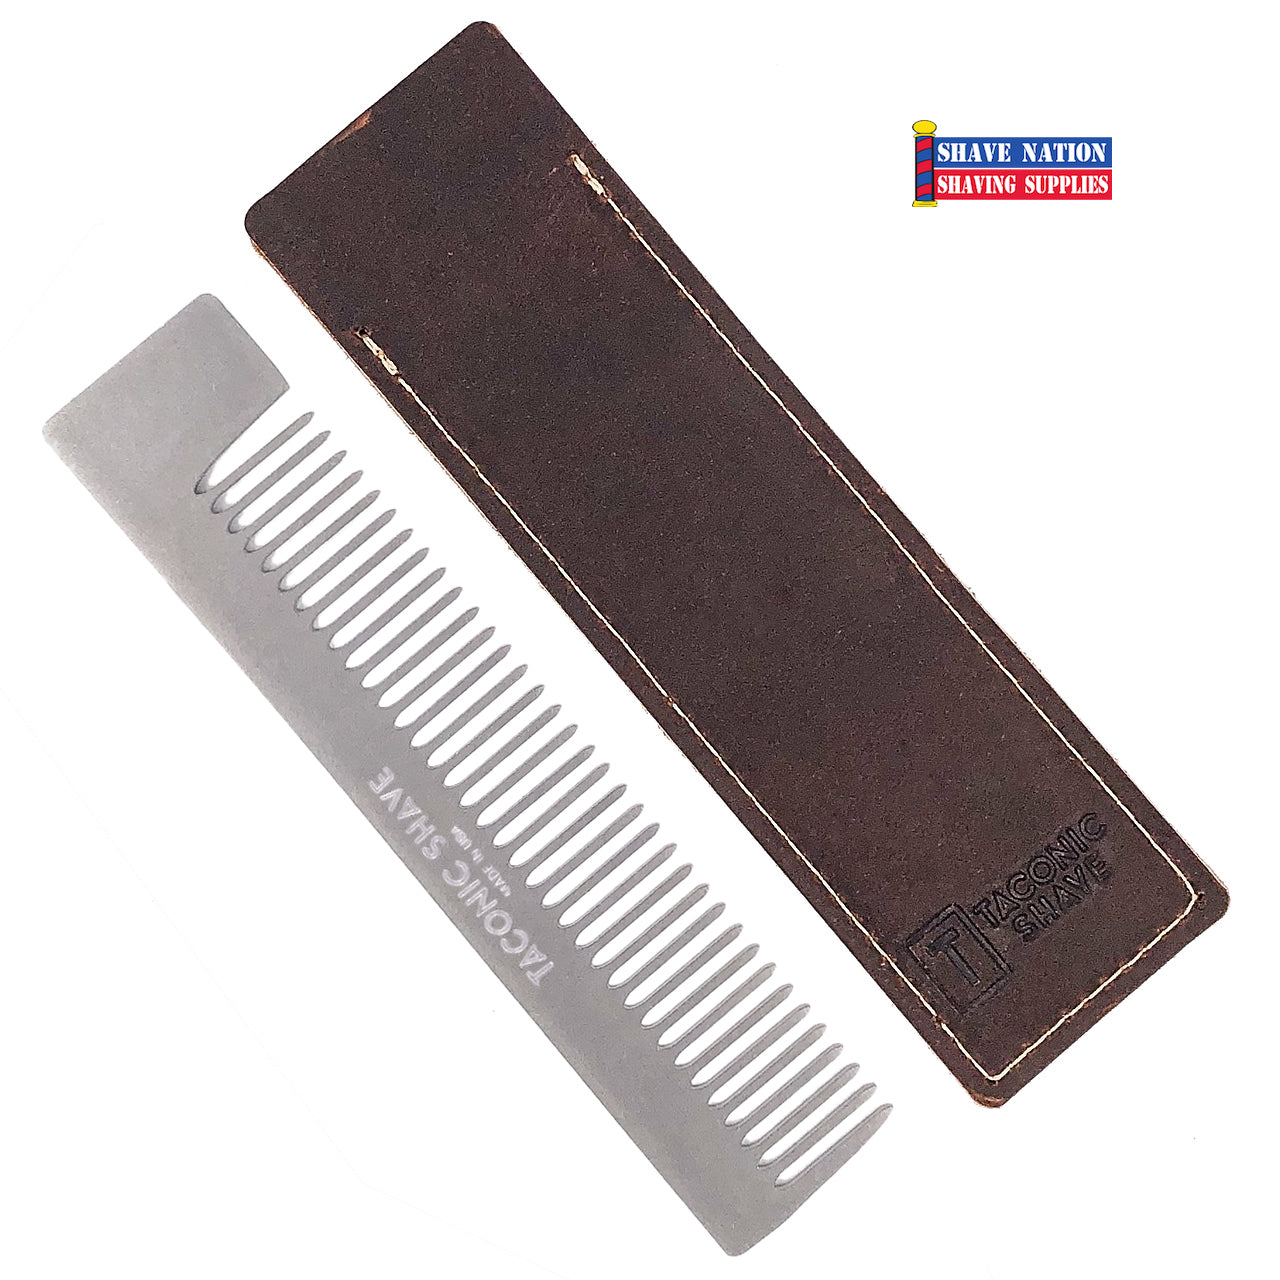 Taconic Stainless Steel Pocket Comb and Sheath